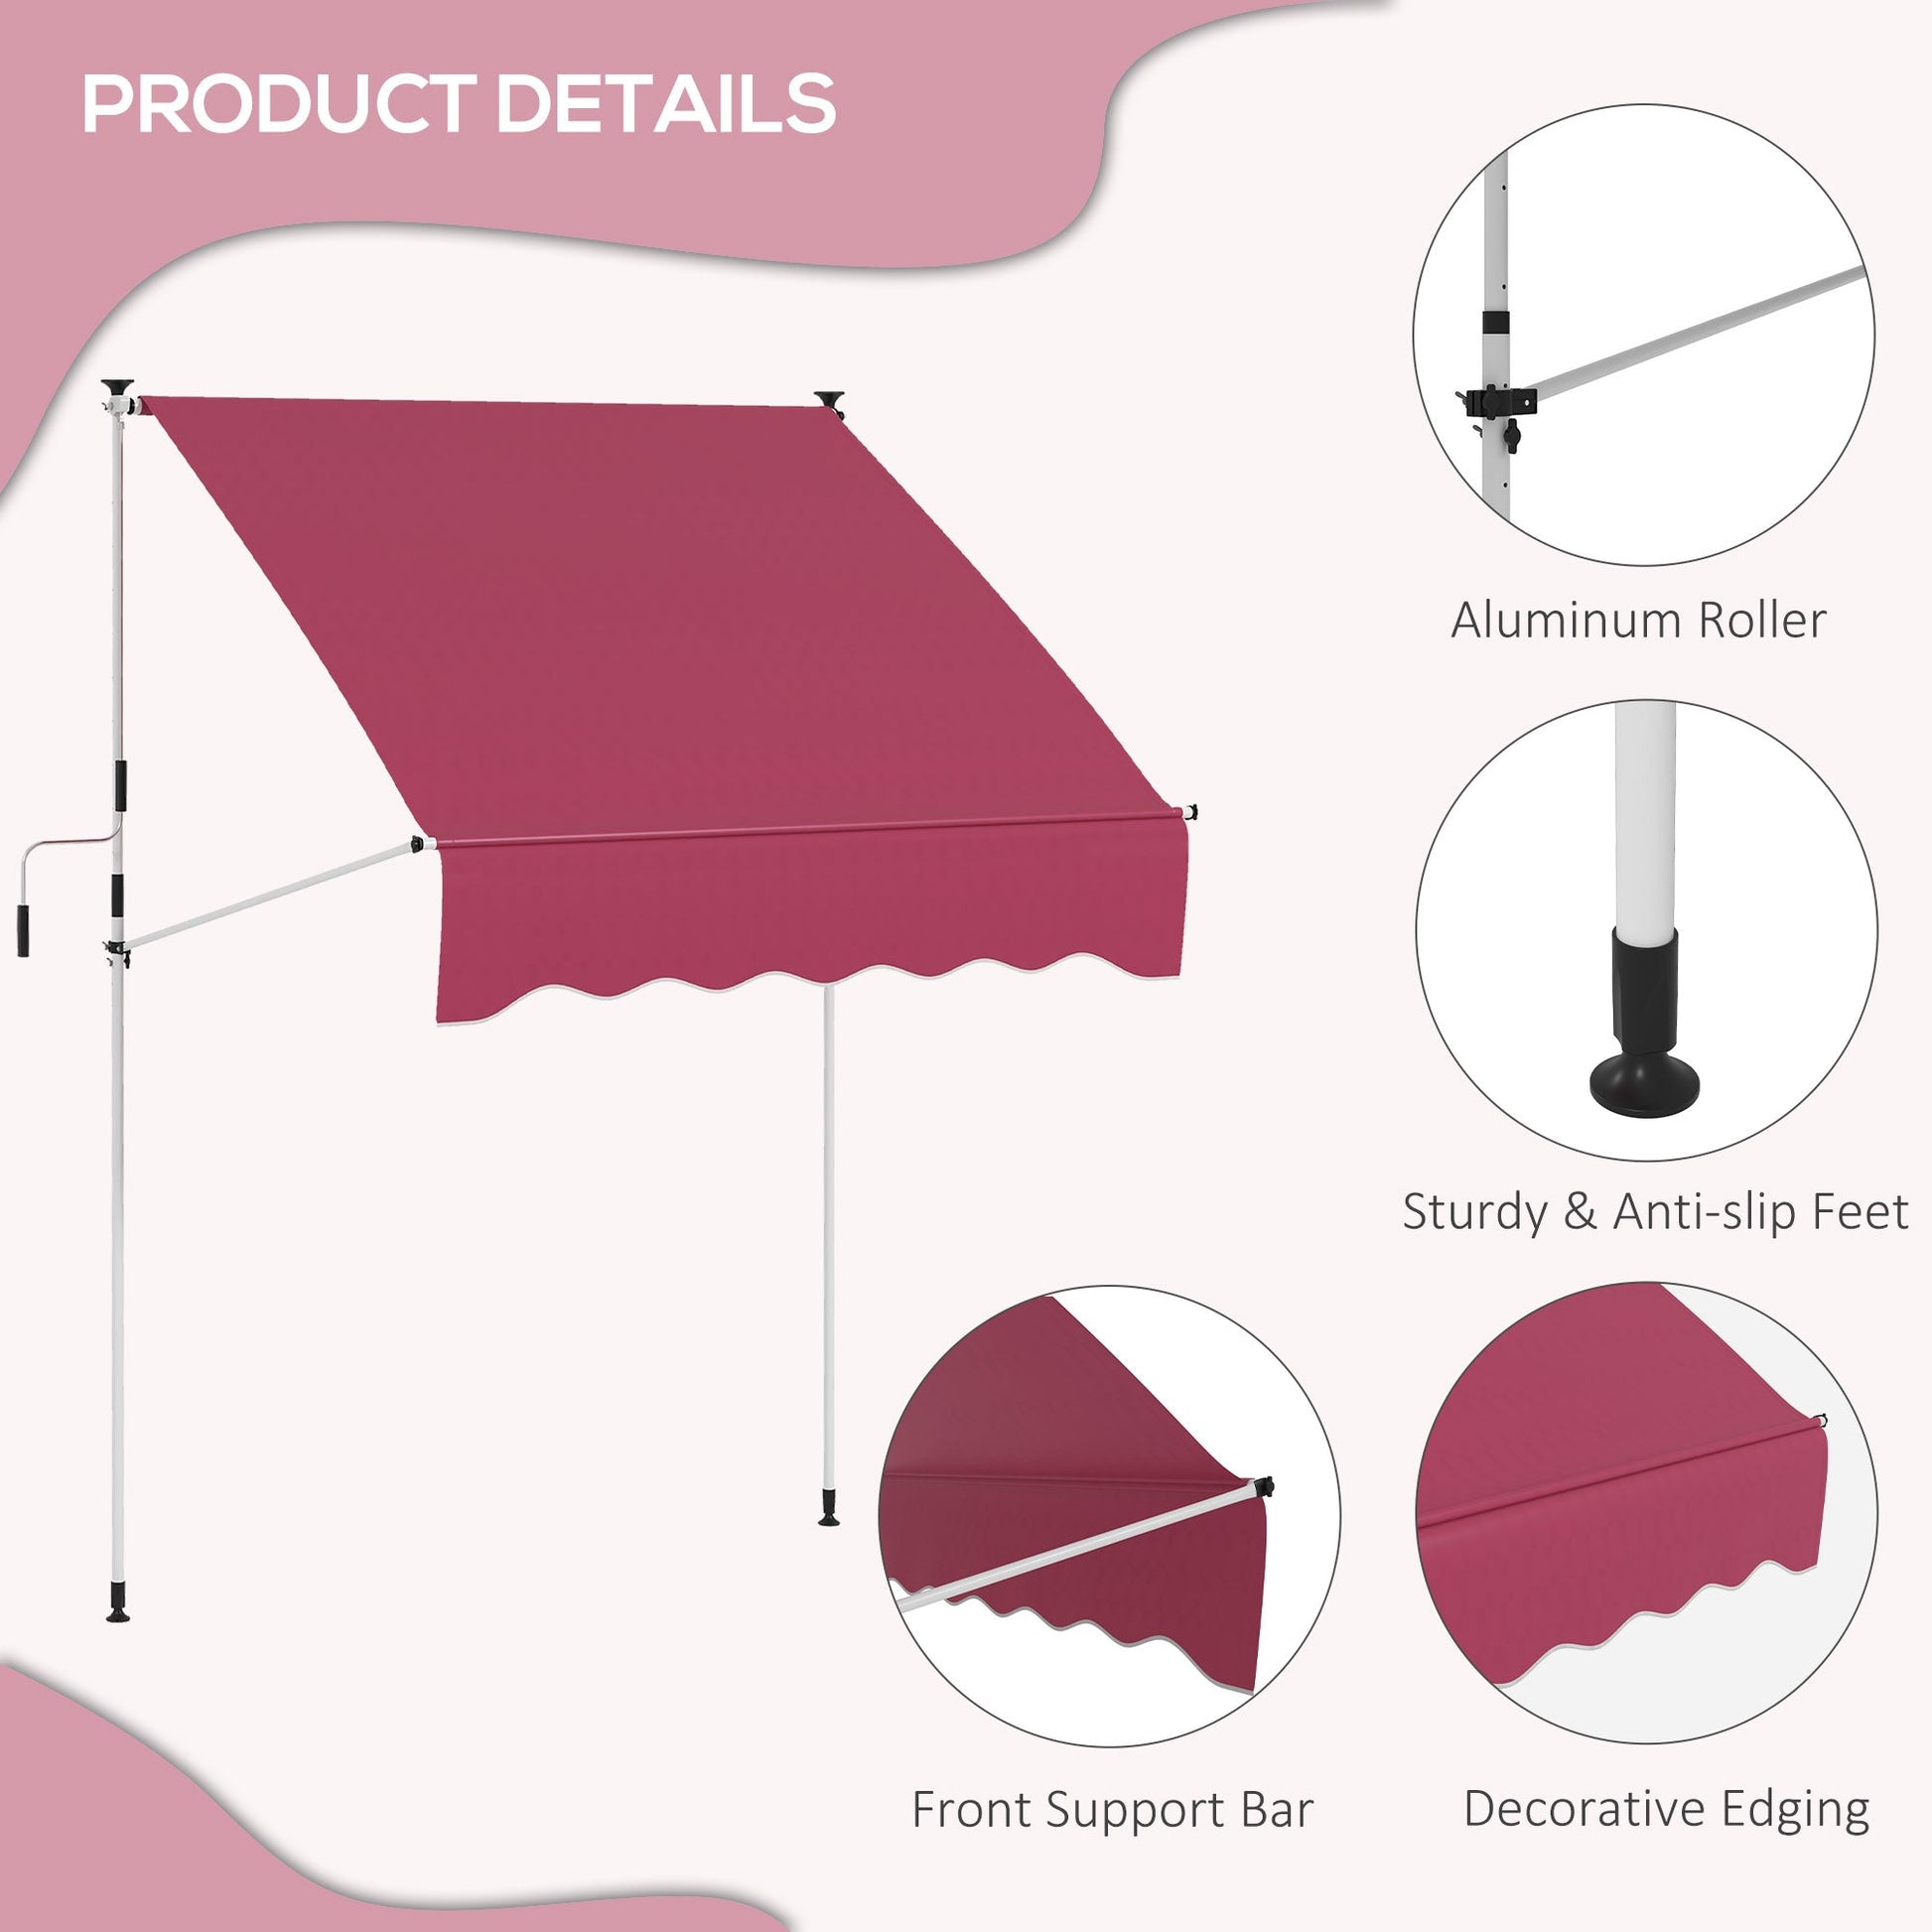 6.6'x5' Manual Retractable Patio Awning Sun Shelter Window Door Deck Canopy, Water Resistant UV Protector, Wine Red at Gallery Canada